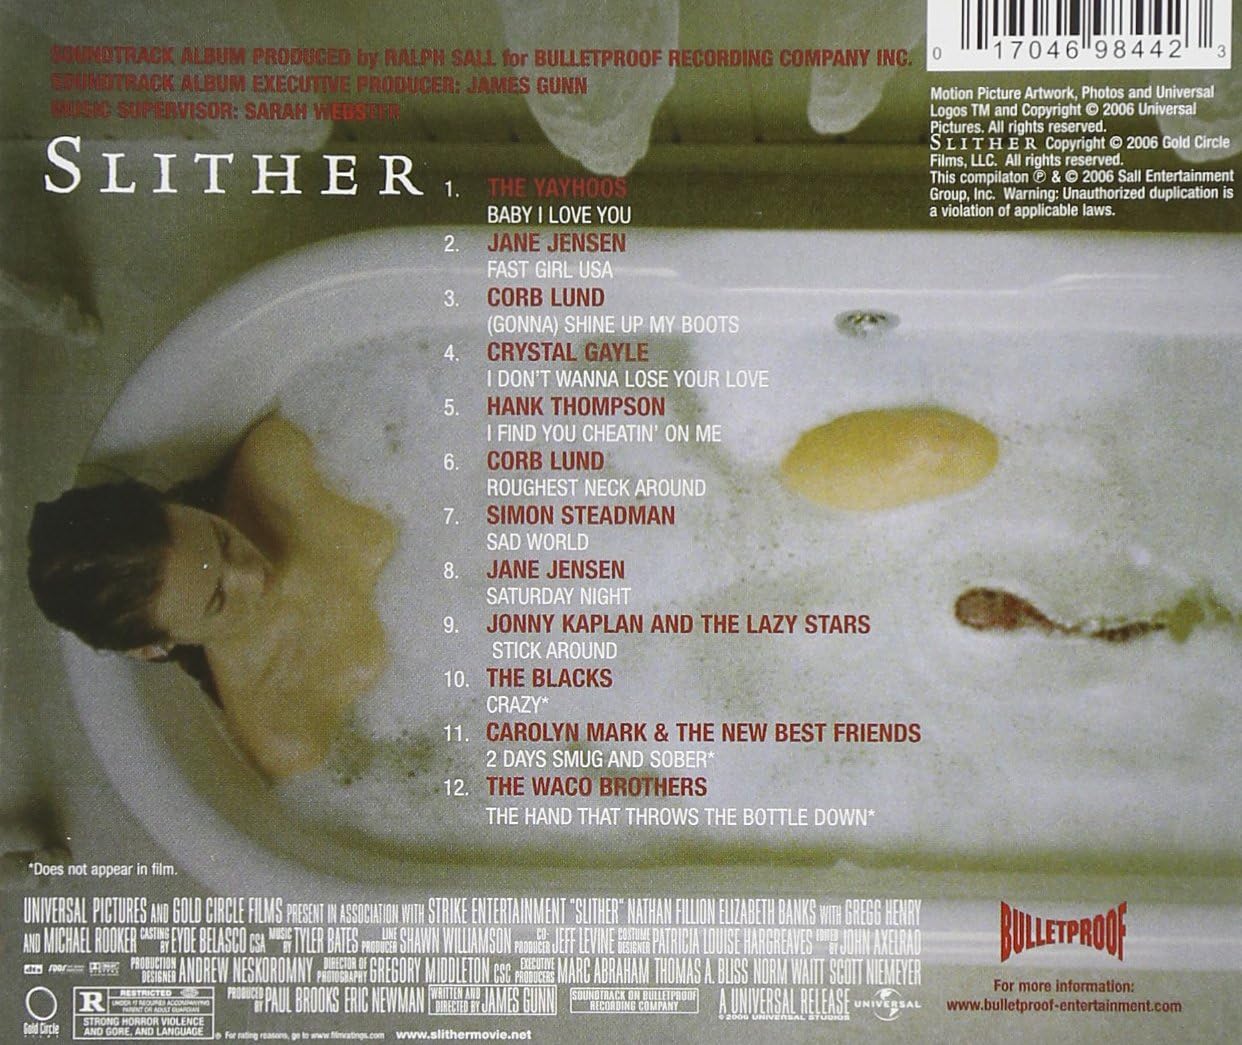 USED CD - Various – Slither (Music From The Motion Picture)